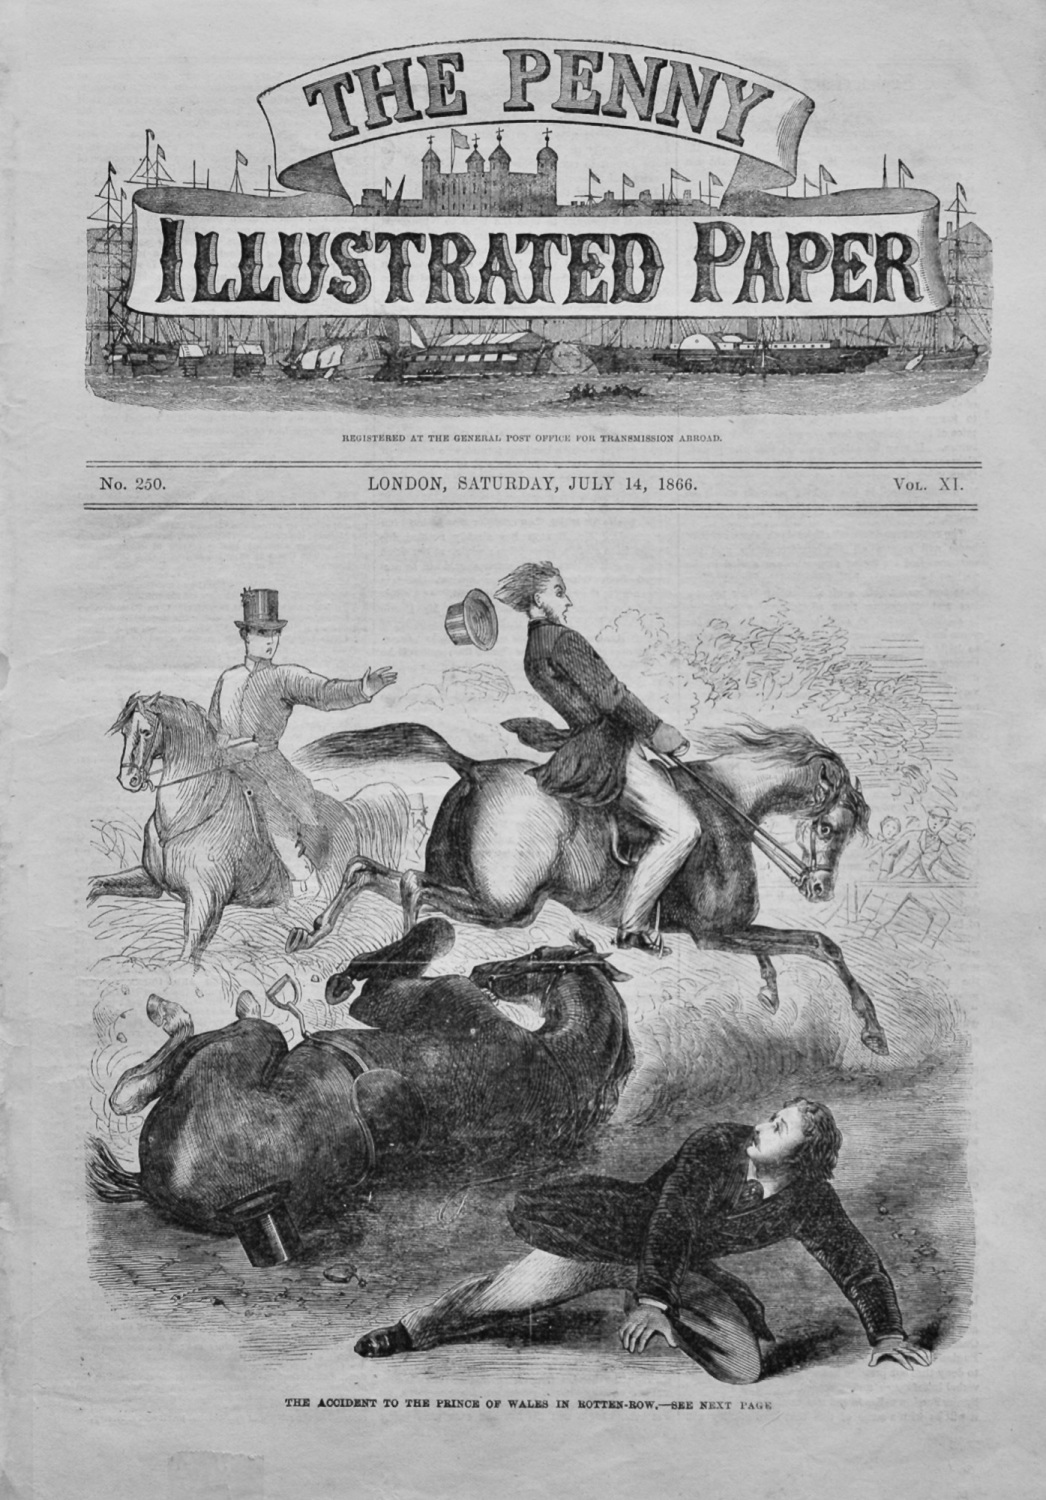 The Penny Illustrated Paper, July 14th, 1866.